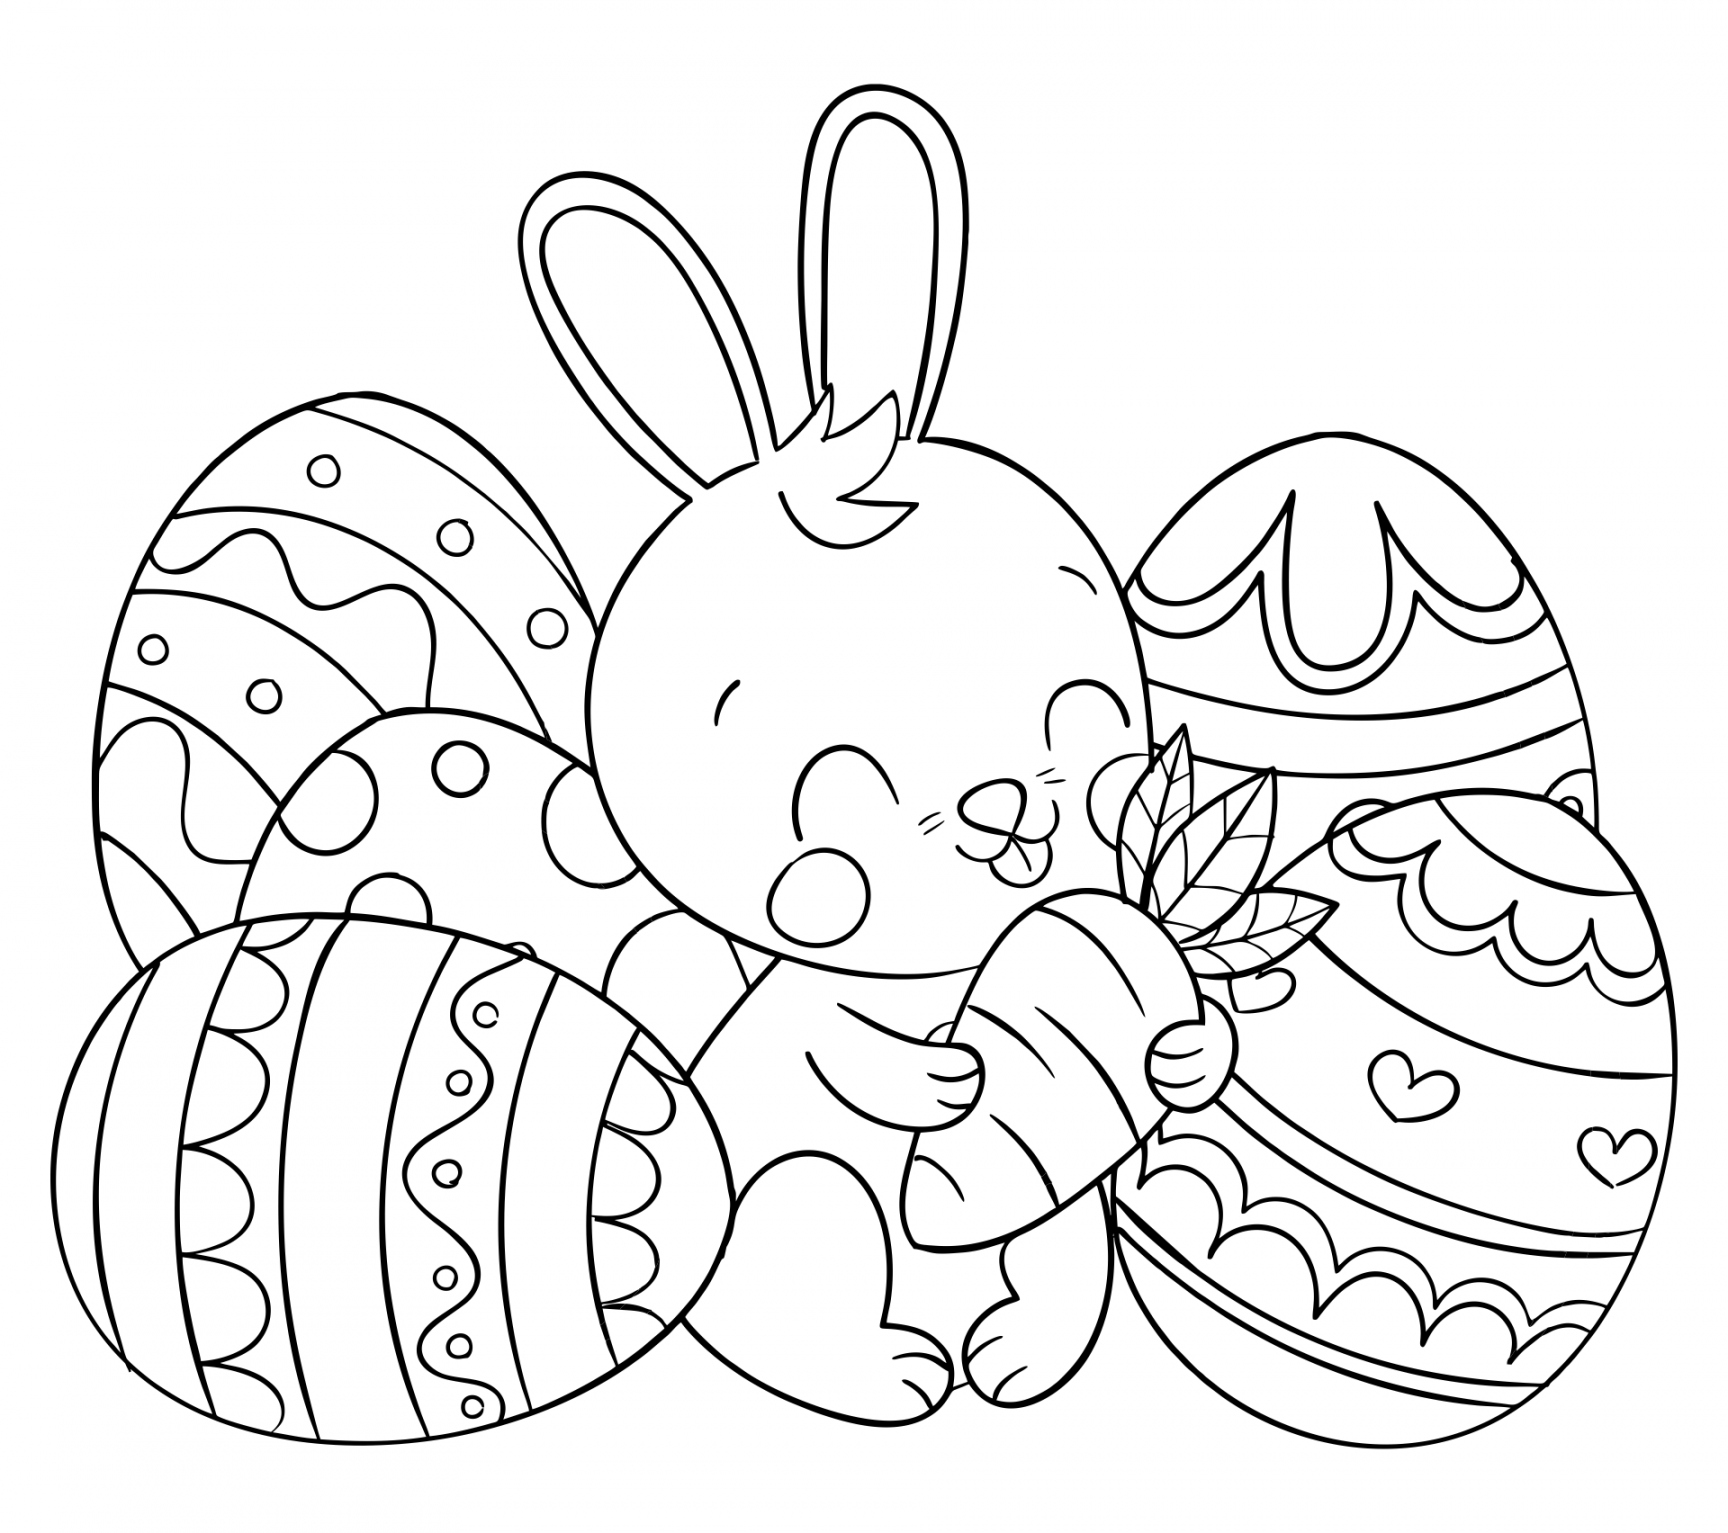 Free Printable Easter Coloring Pages - Printable -  Best Free Printable Easter Egg Coloring Page - printablee